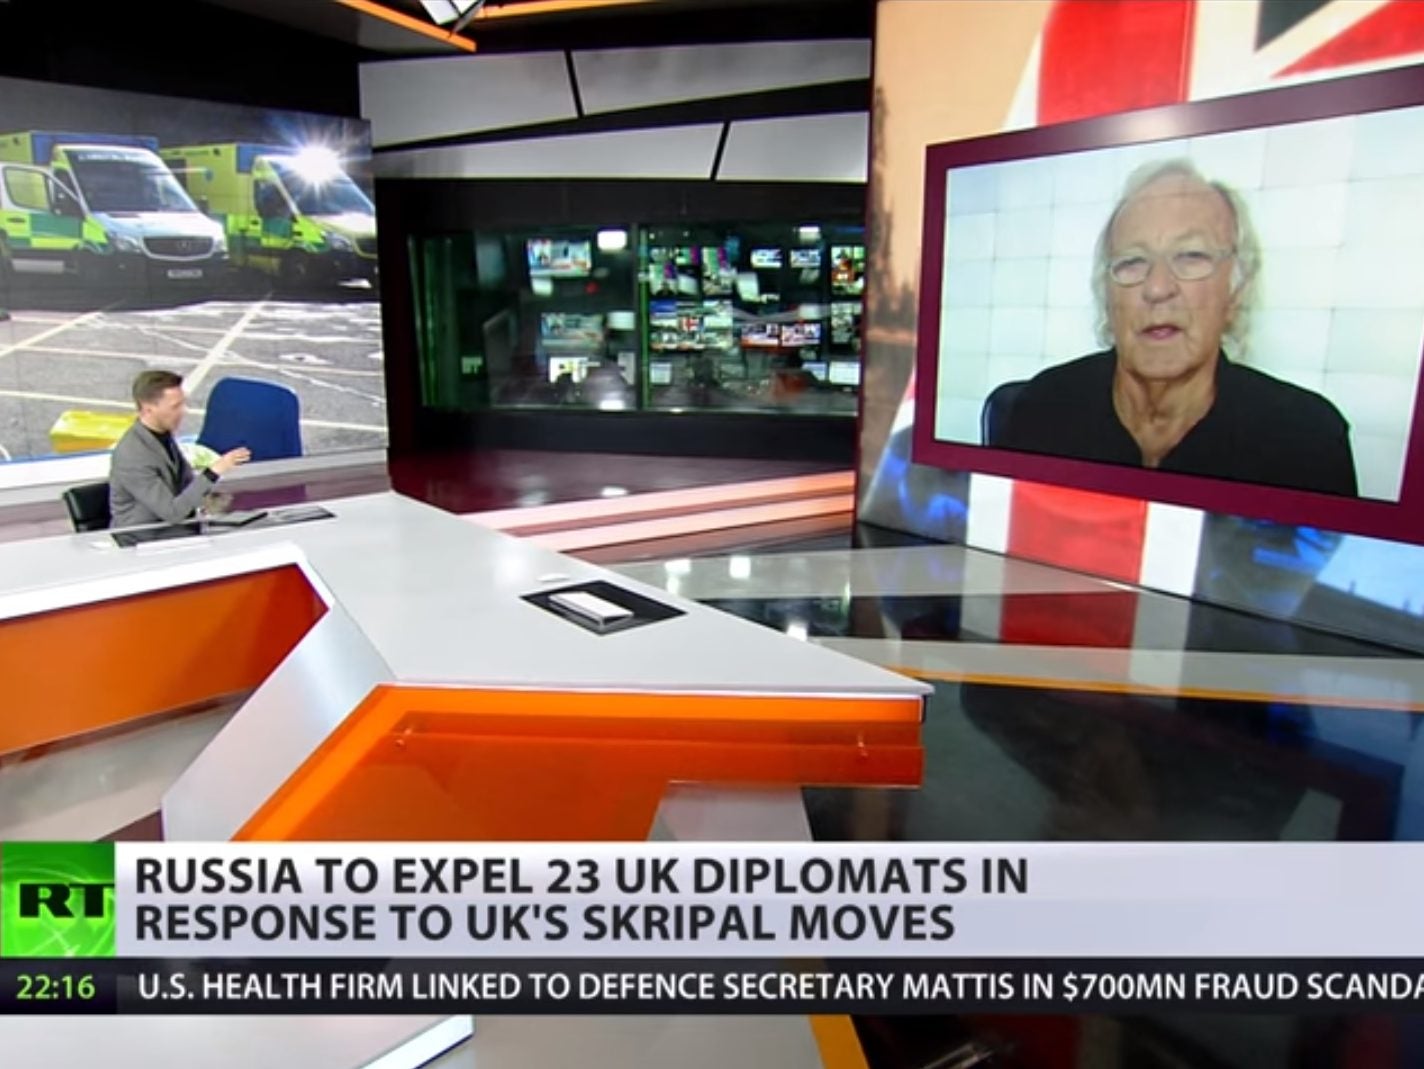 Journalist John Pilger says ex-Russian spy poisoning case is a 'carefully constructed drama in which the media plays a role'